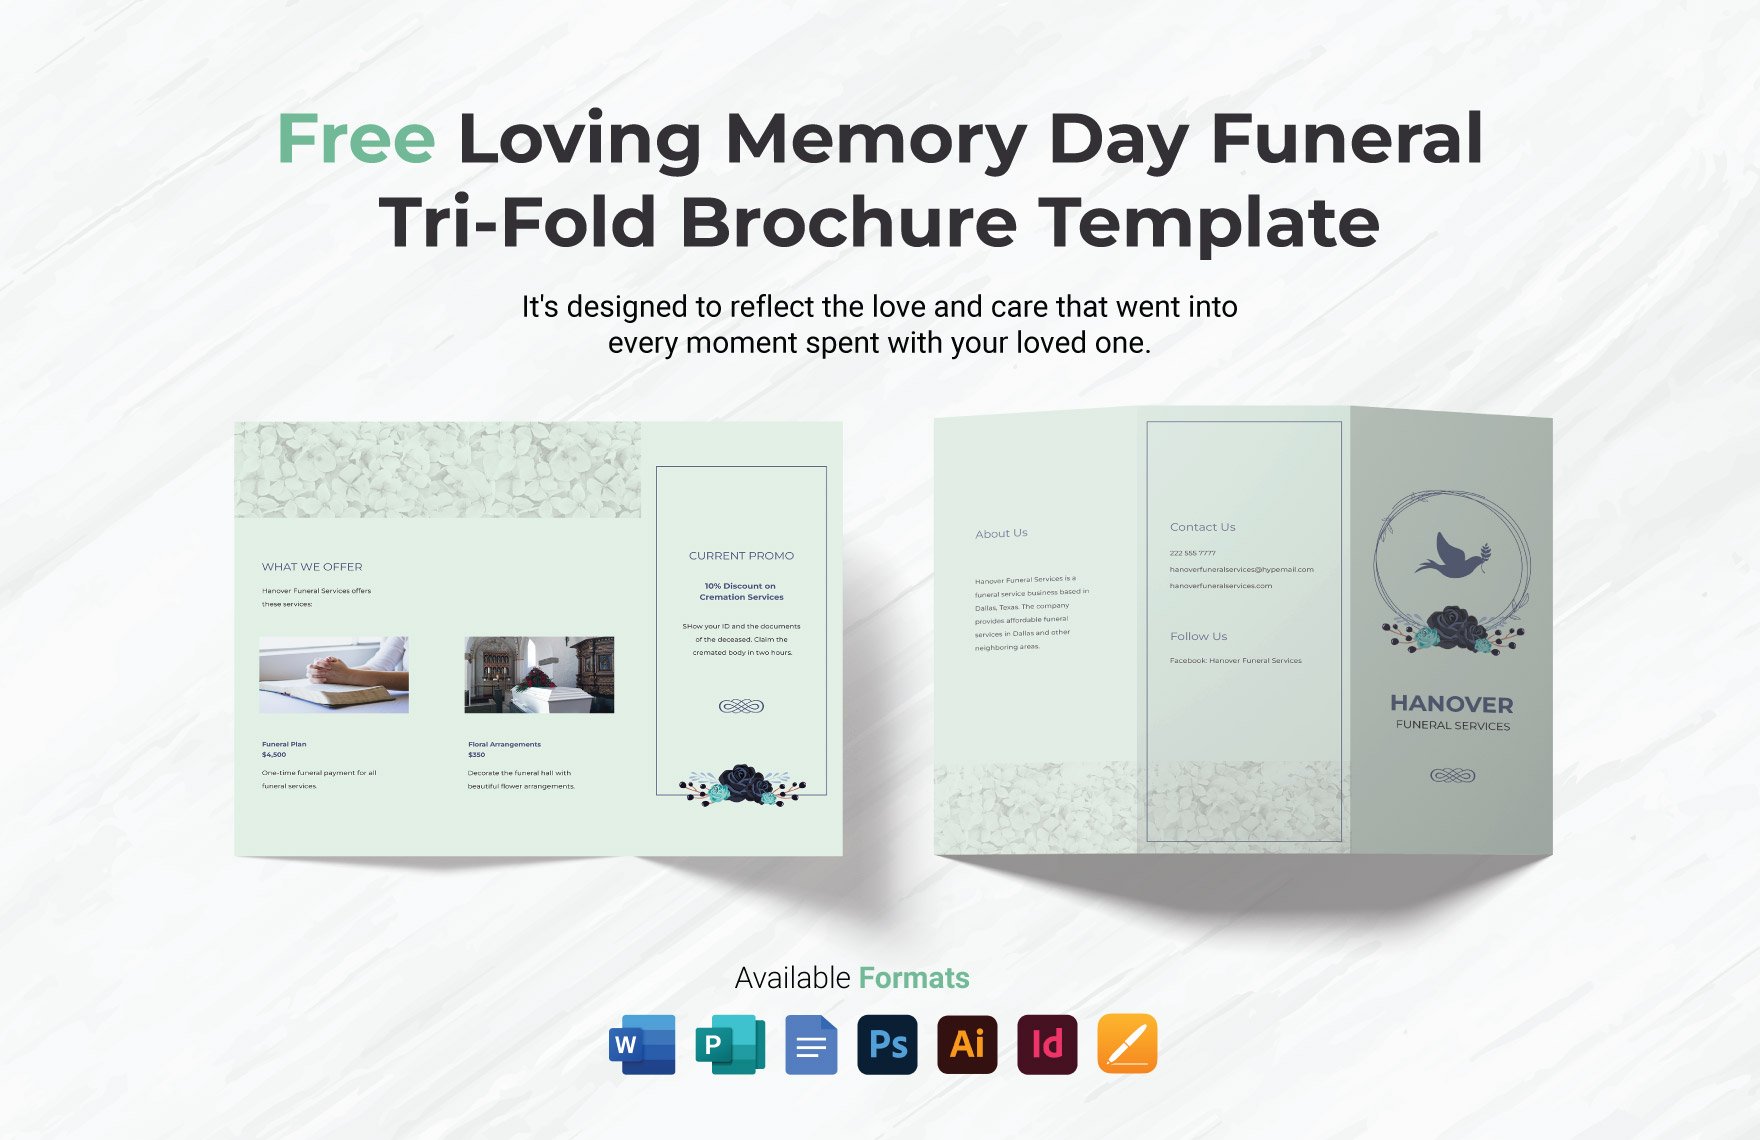 Free Loving Memory Day Funeral Tri-Fold Brochure Template